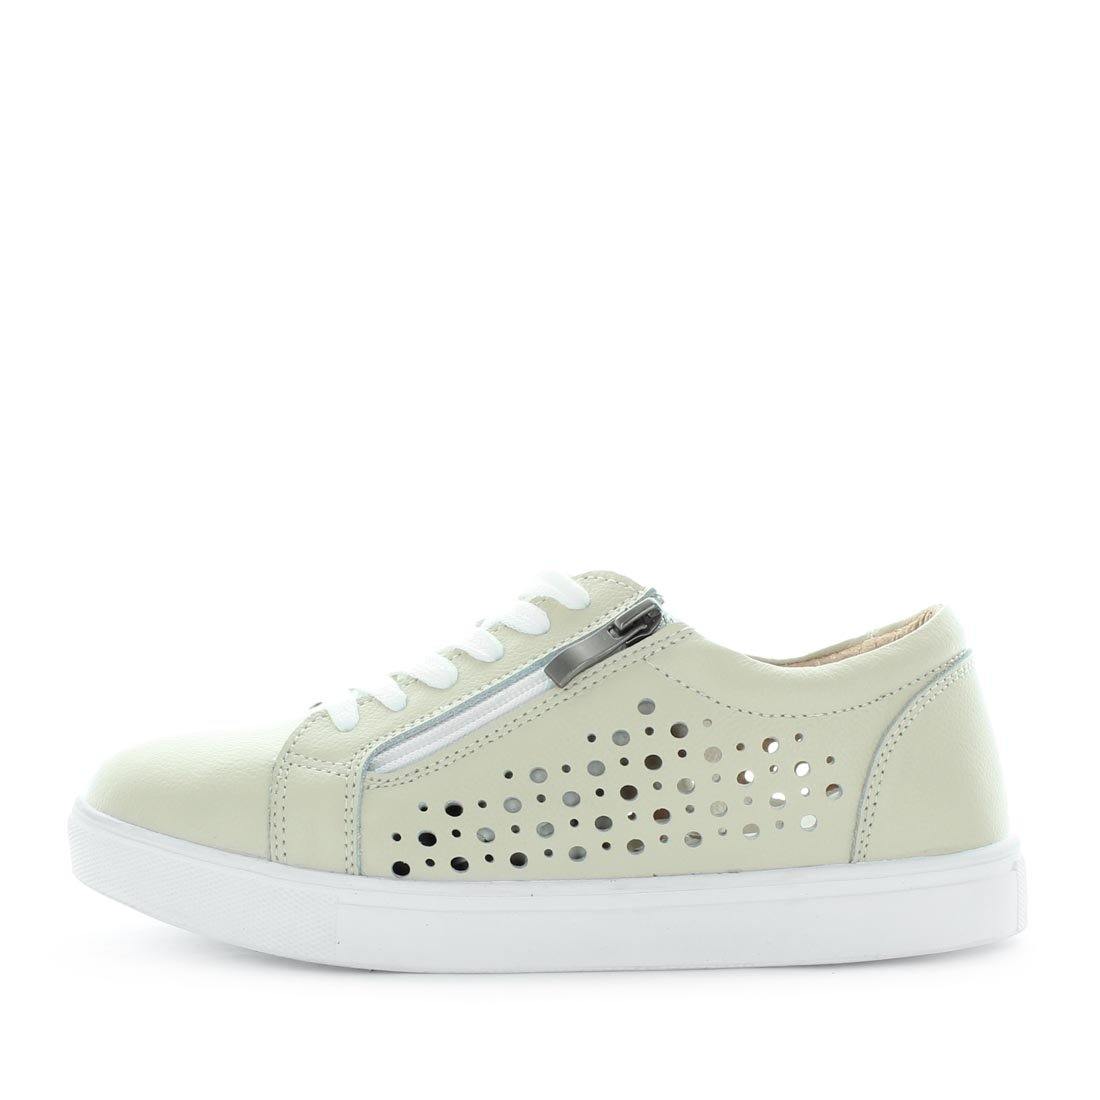 COTTON by just bee - just bee comfort - leather women's comfort sneakers with extra removable sole for more cushioning - hole punched leather upper - ladies comfort sneakers-  women's flats with lace up features and side zip (6584738381903)